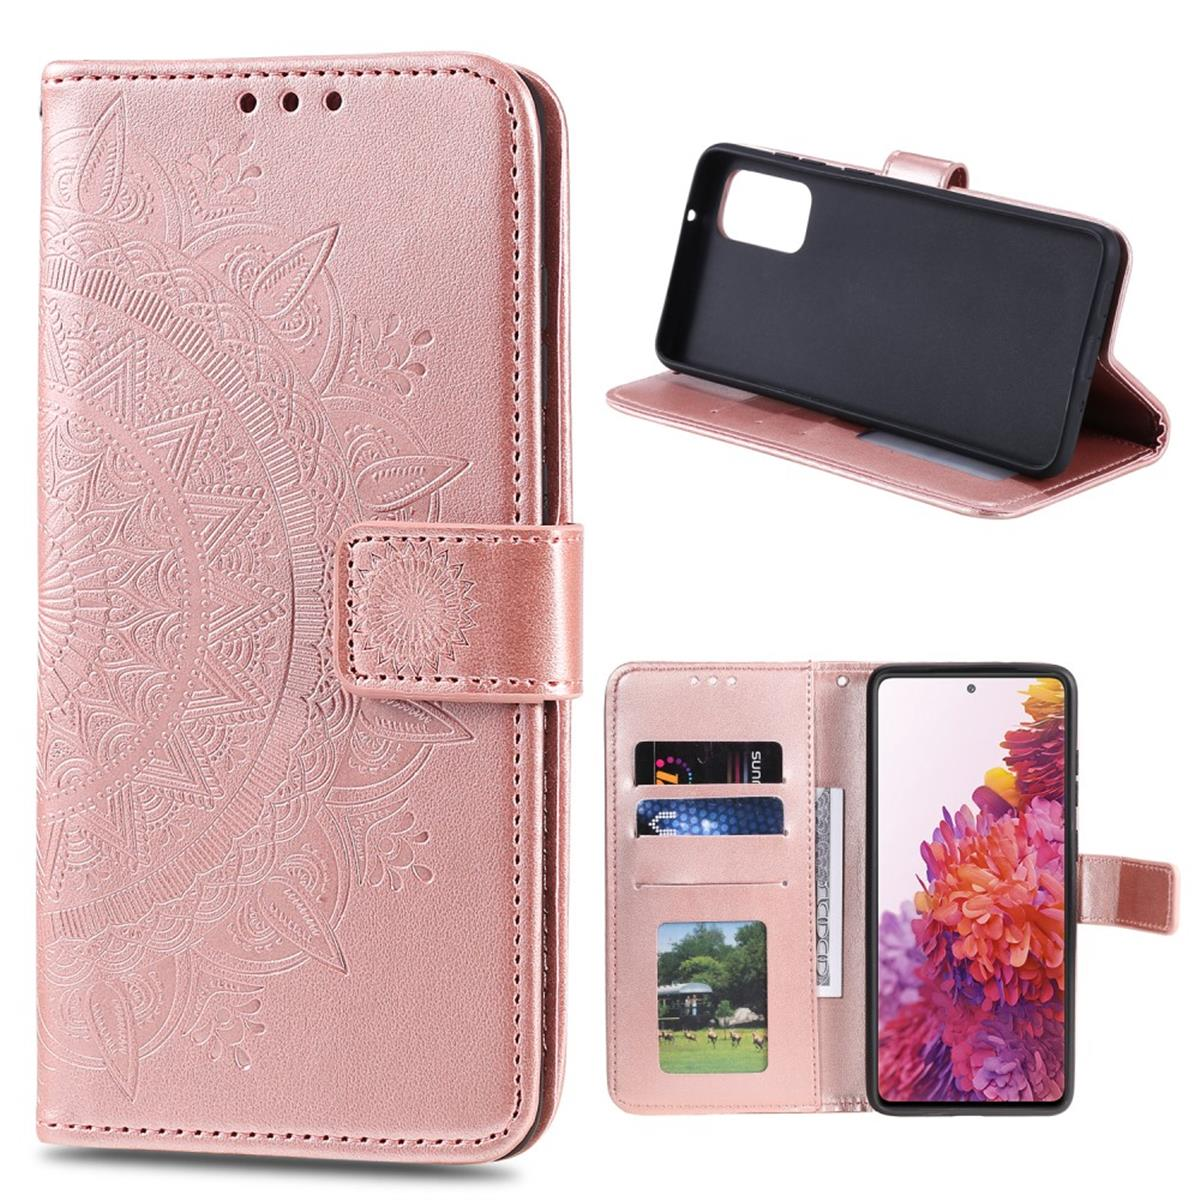 COVERKINGZ Klapphülle mit Mandala Muster, S20 Samsung, Galaxy FE, Roségold Bookcover